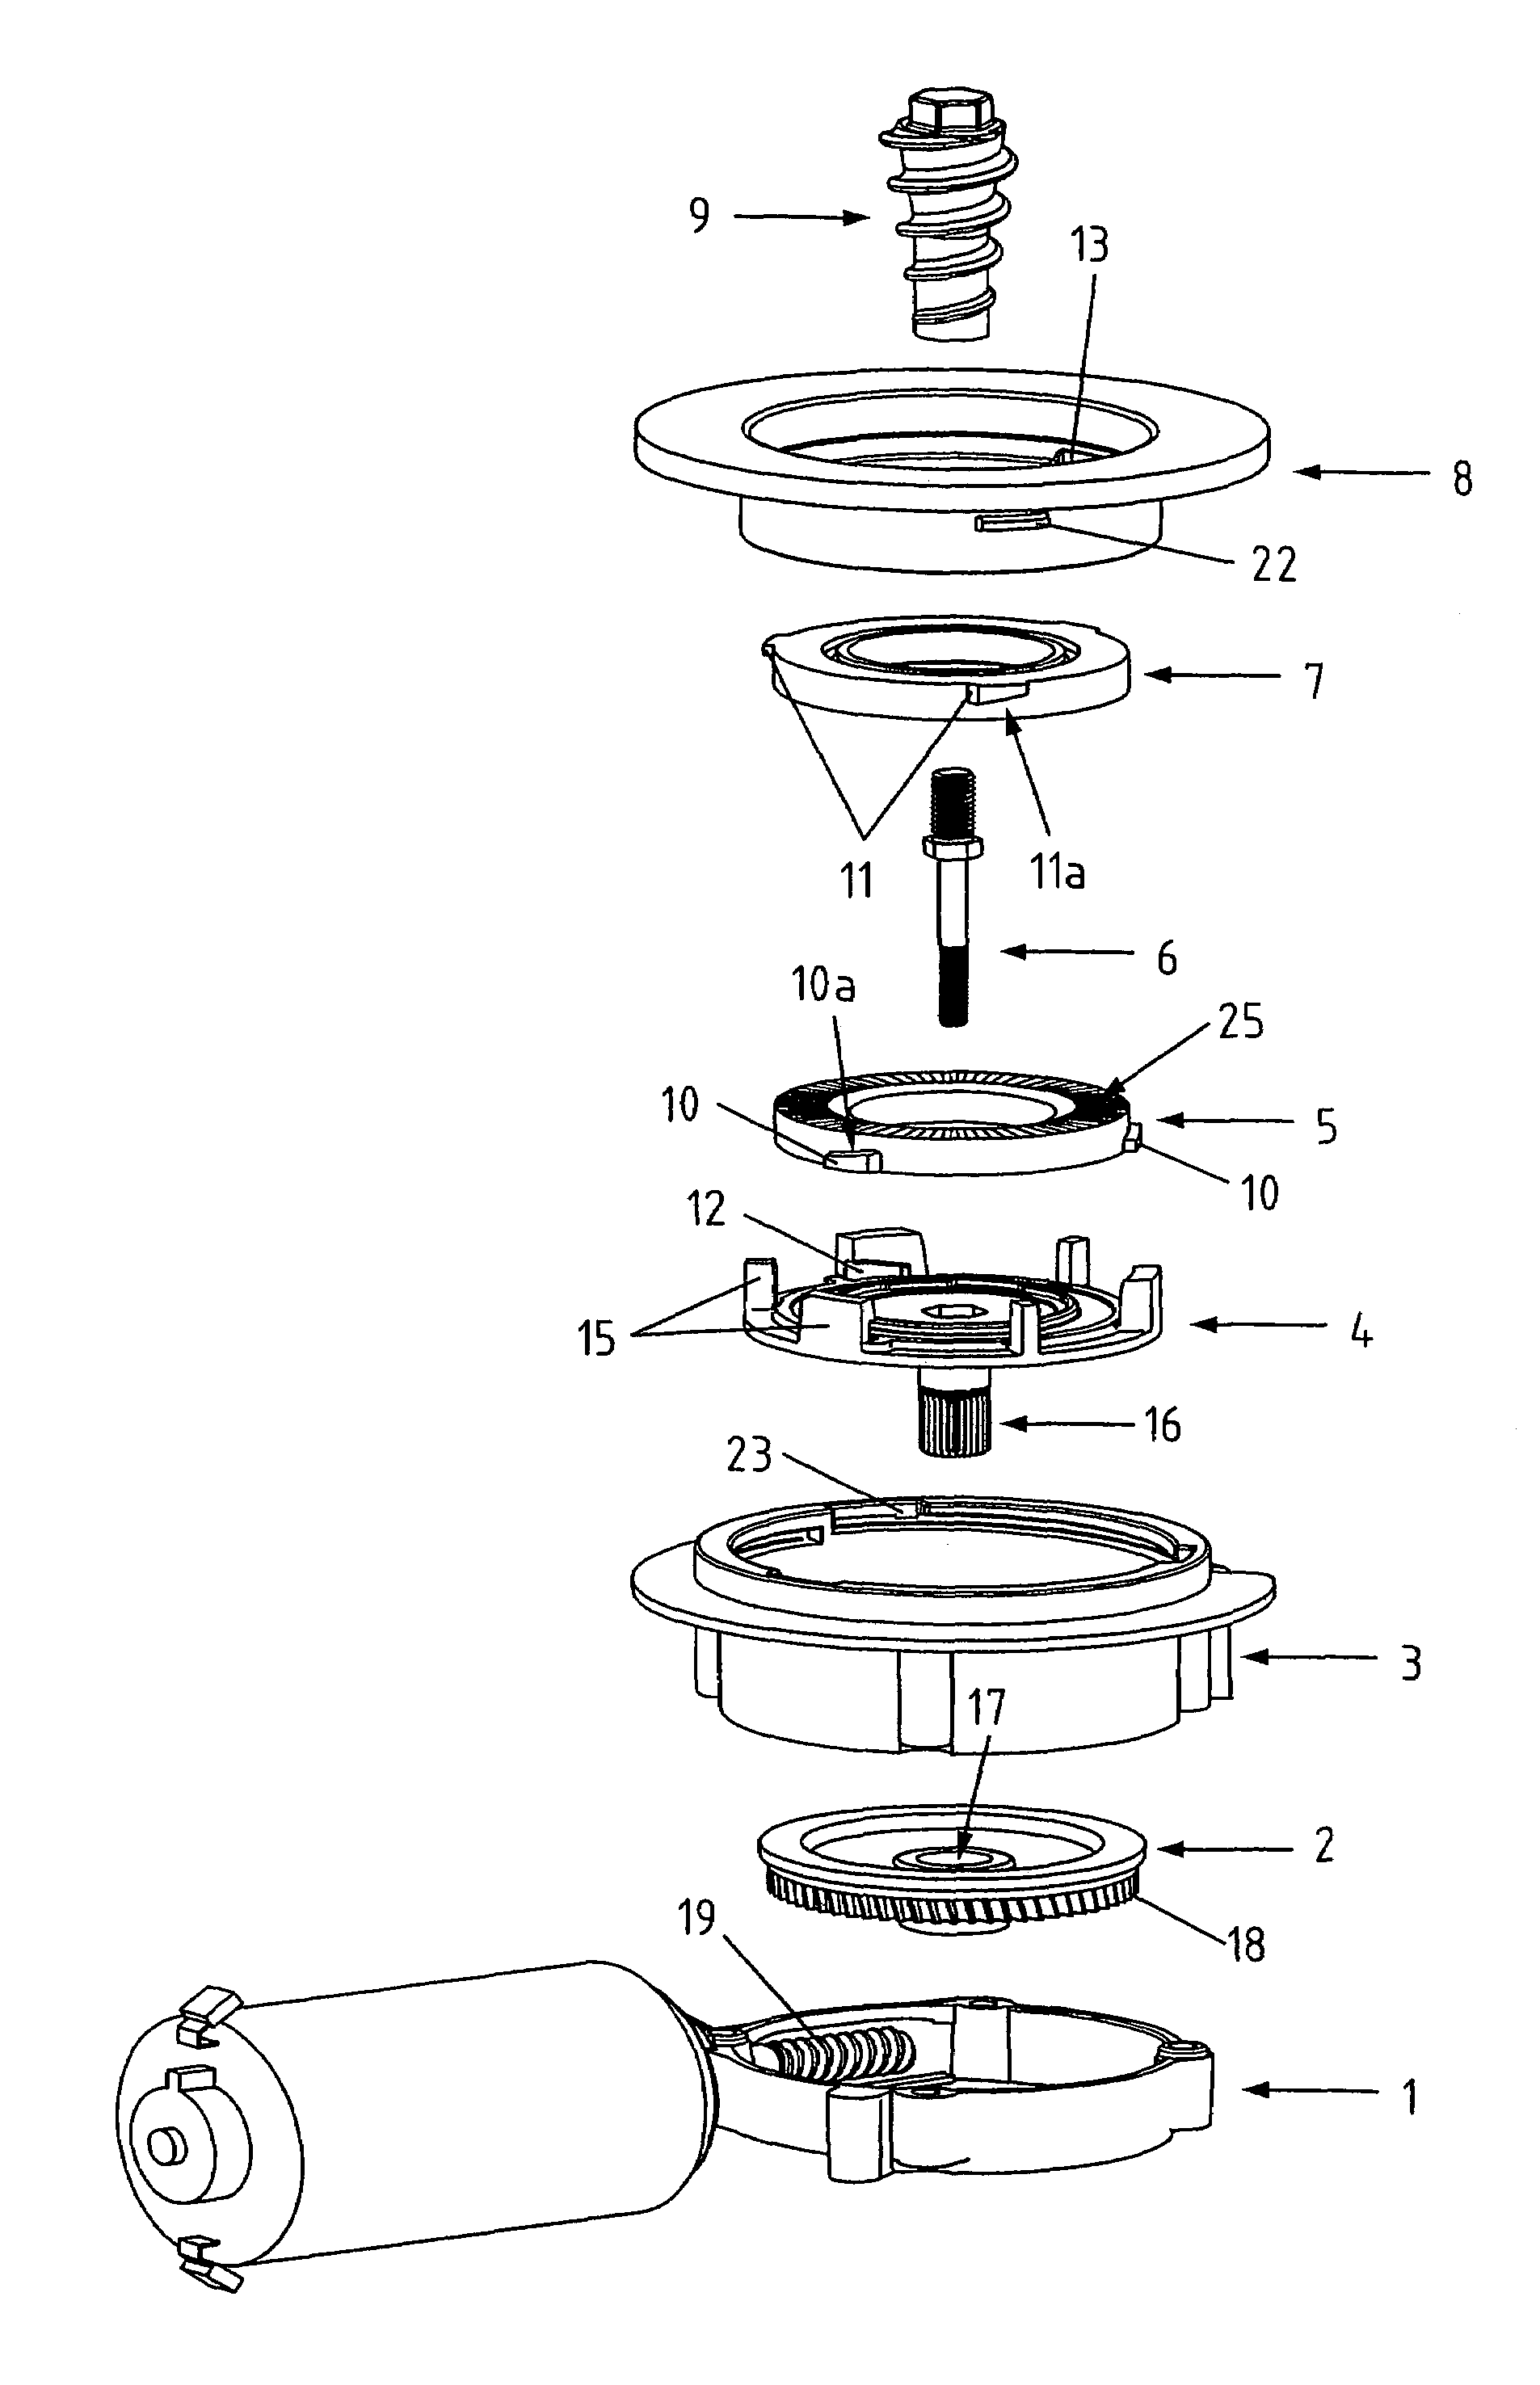 Coffee grinder assembly for a coffee machine